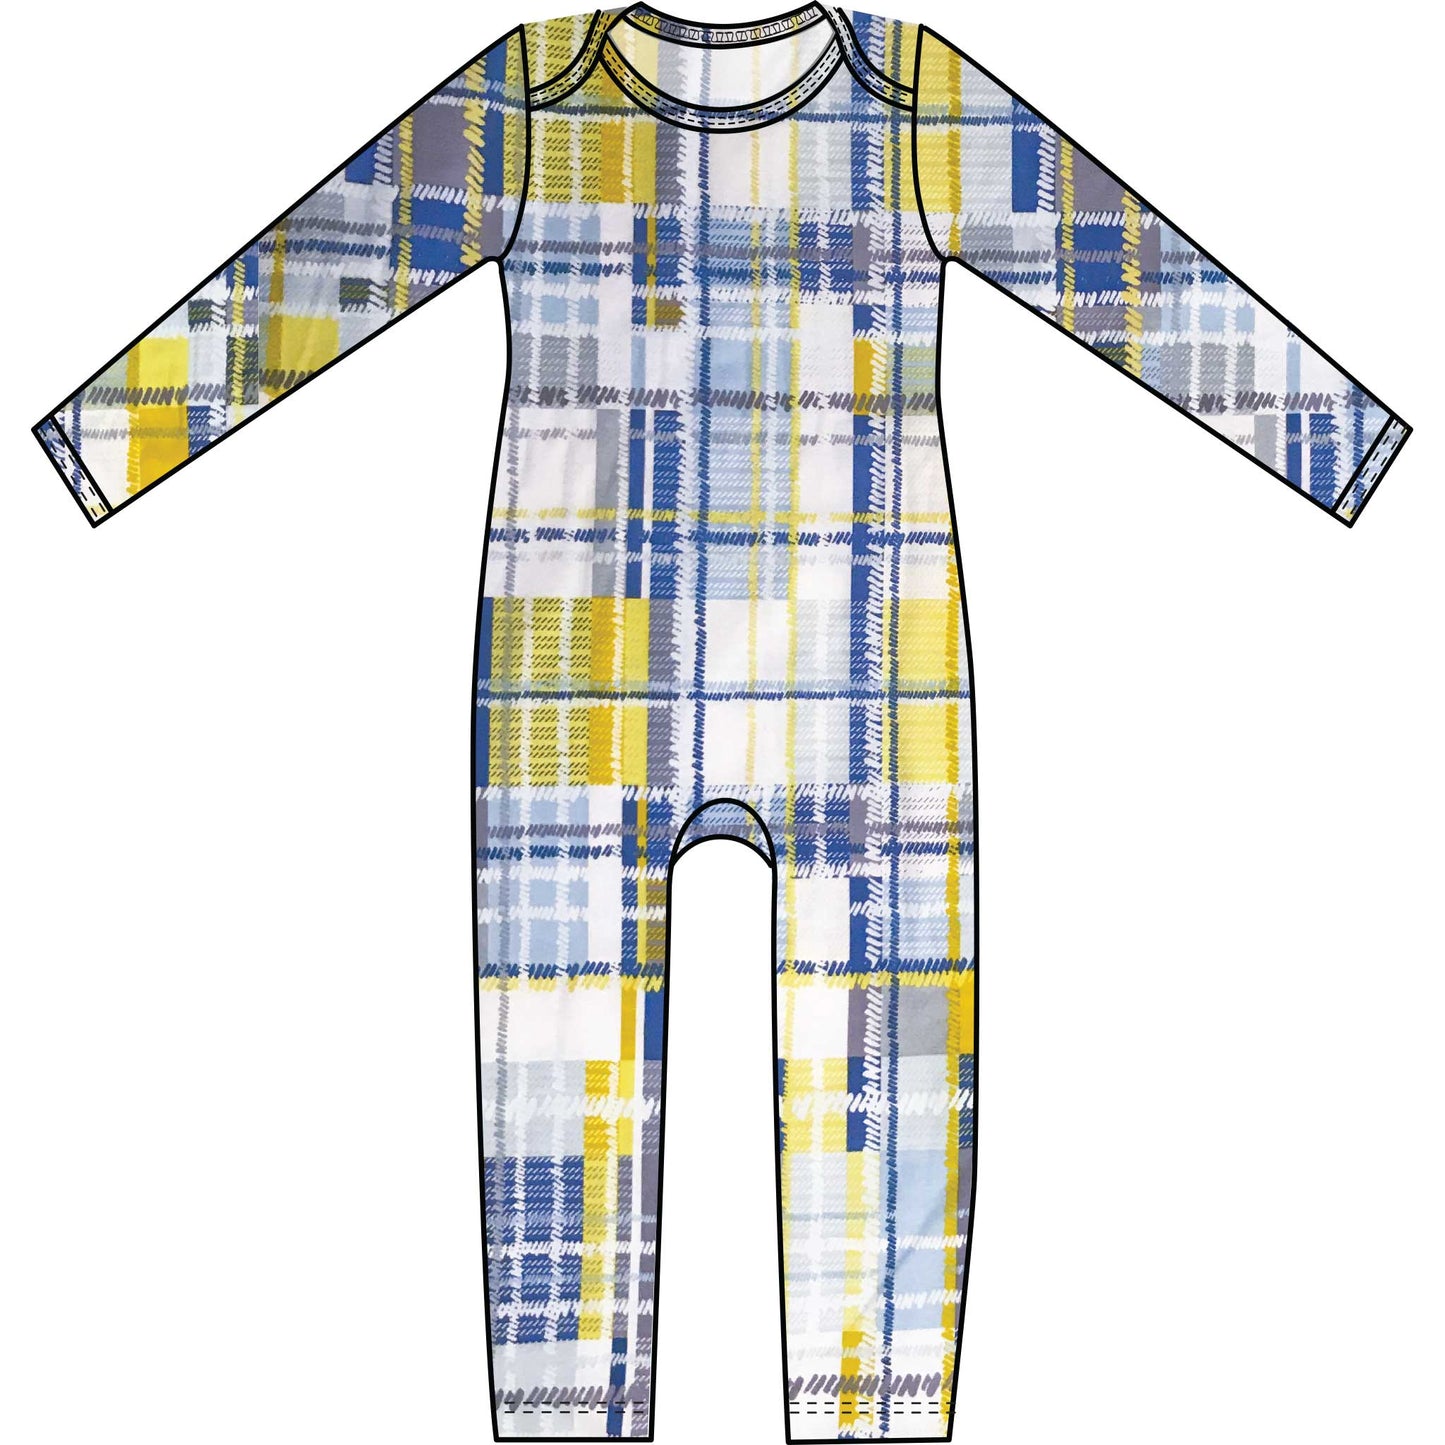 Mod Union™ Infant Long Sleeved Baby Union Suit | Various Fun Cotton Knit Prints-Baby One-Pieces-0-3 months-Blueberry Plaid-Hagsters